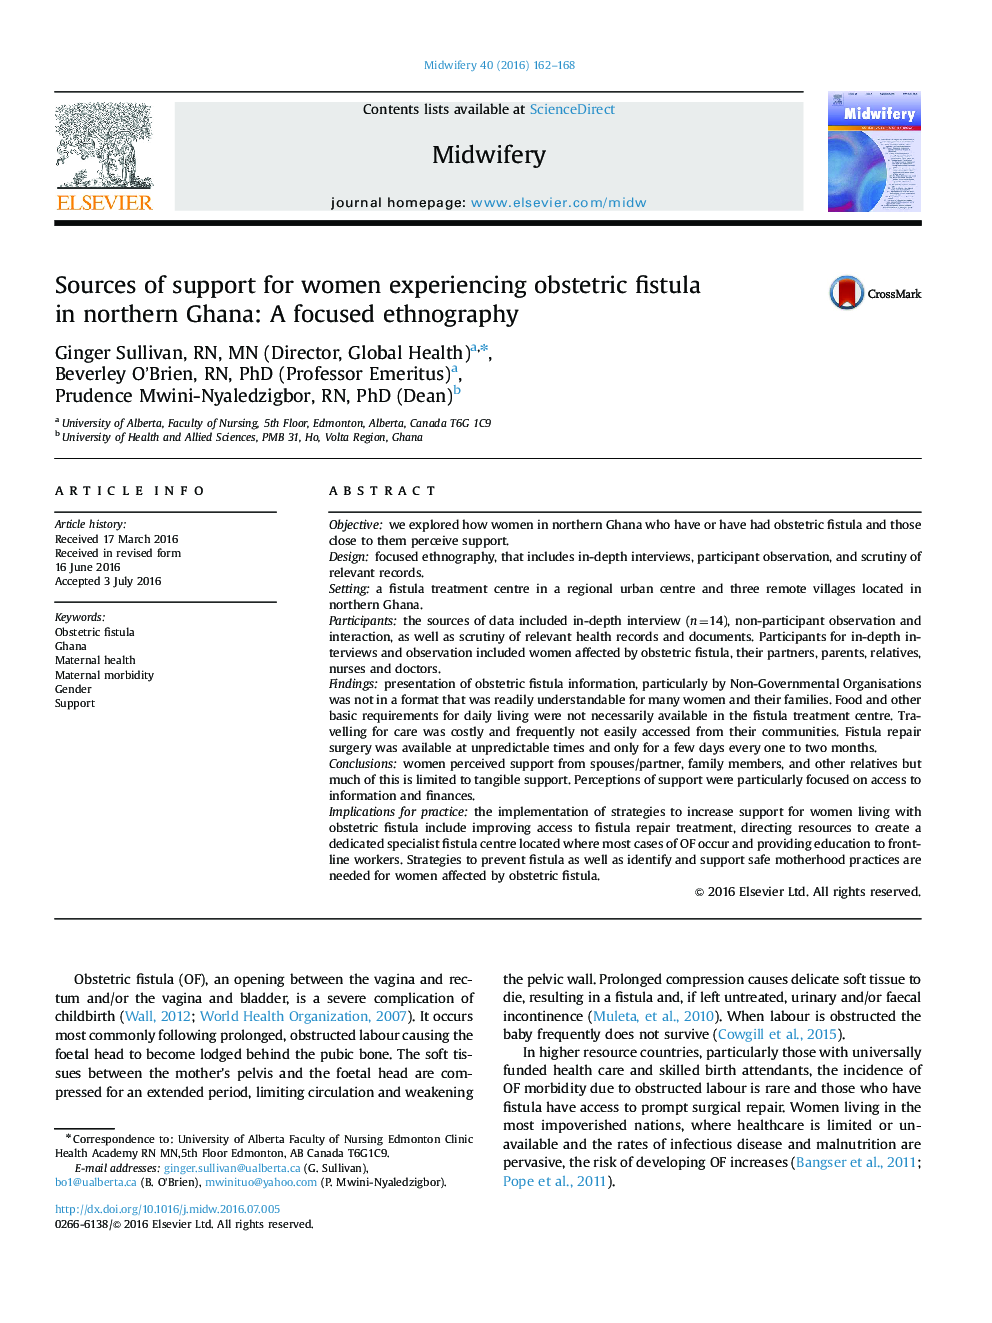 Sources of support for women experiencing obstetric fistula in northern Ghana: A focused ethnography